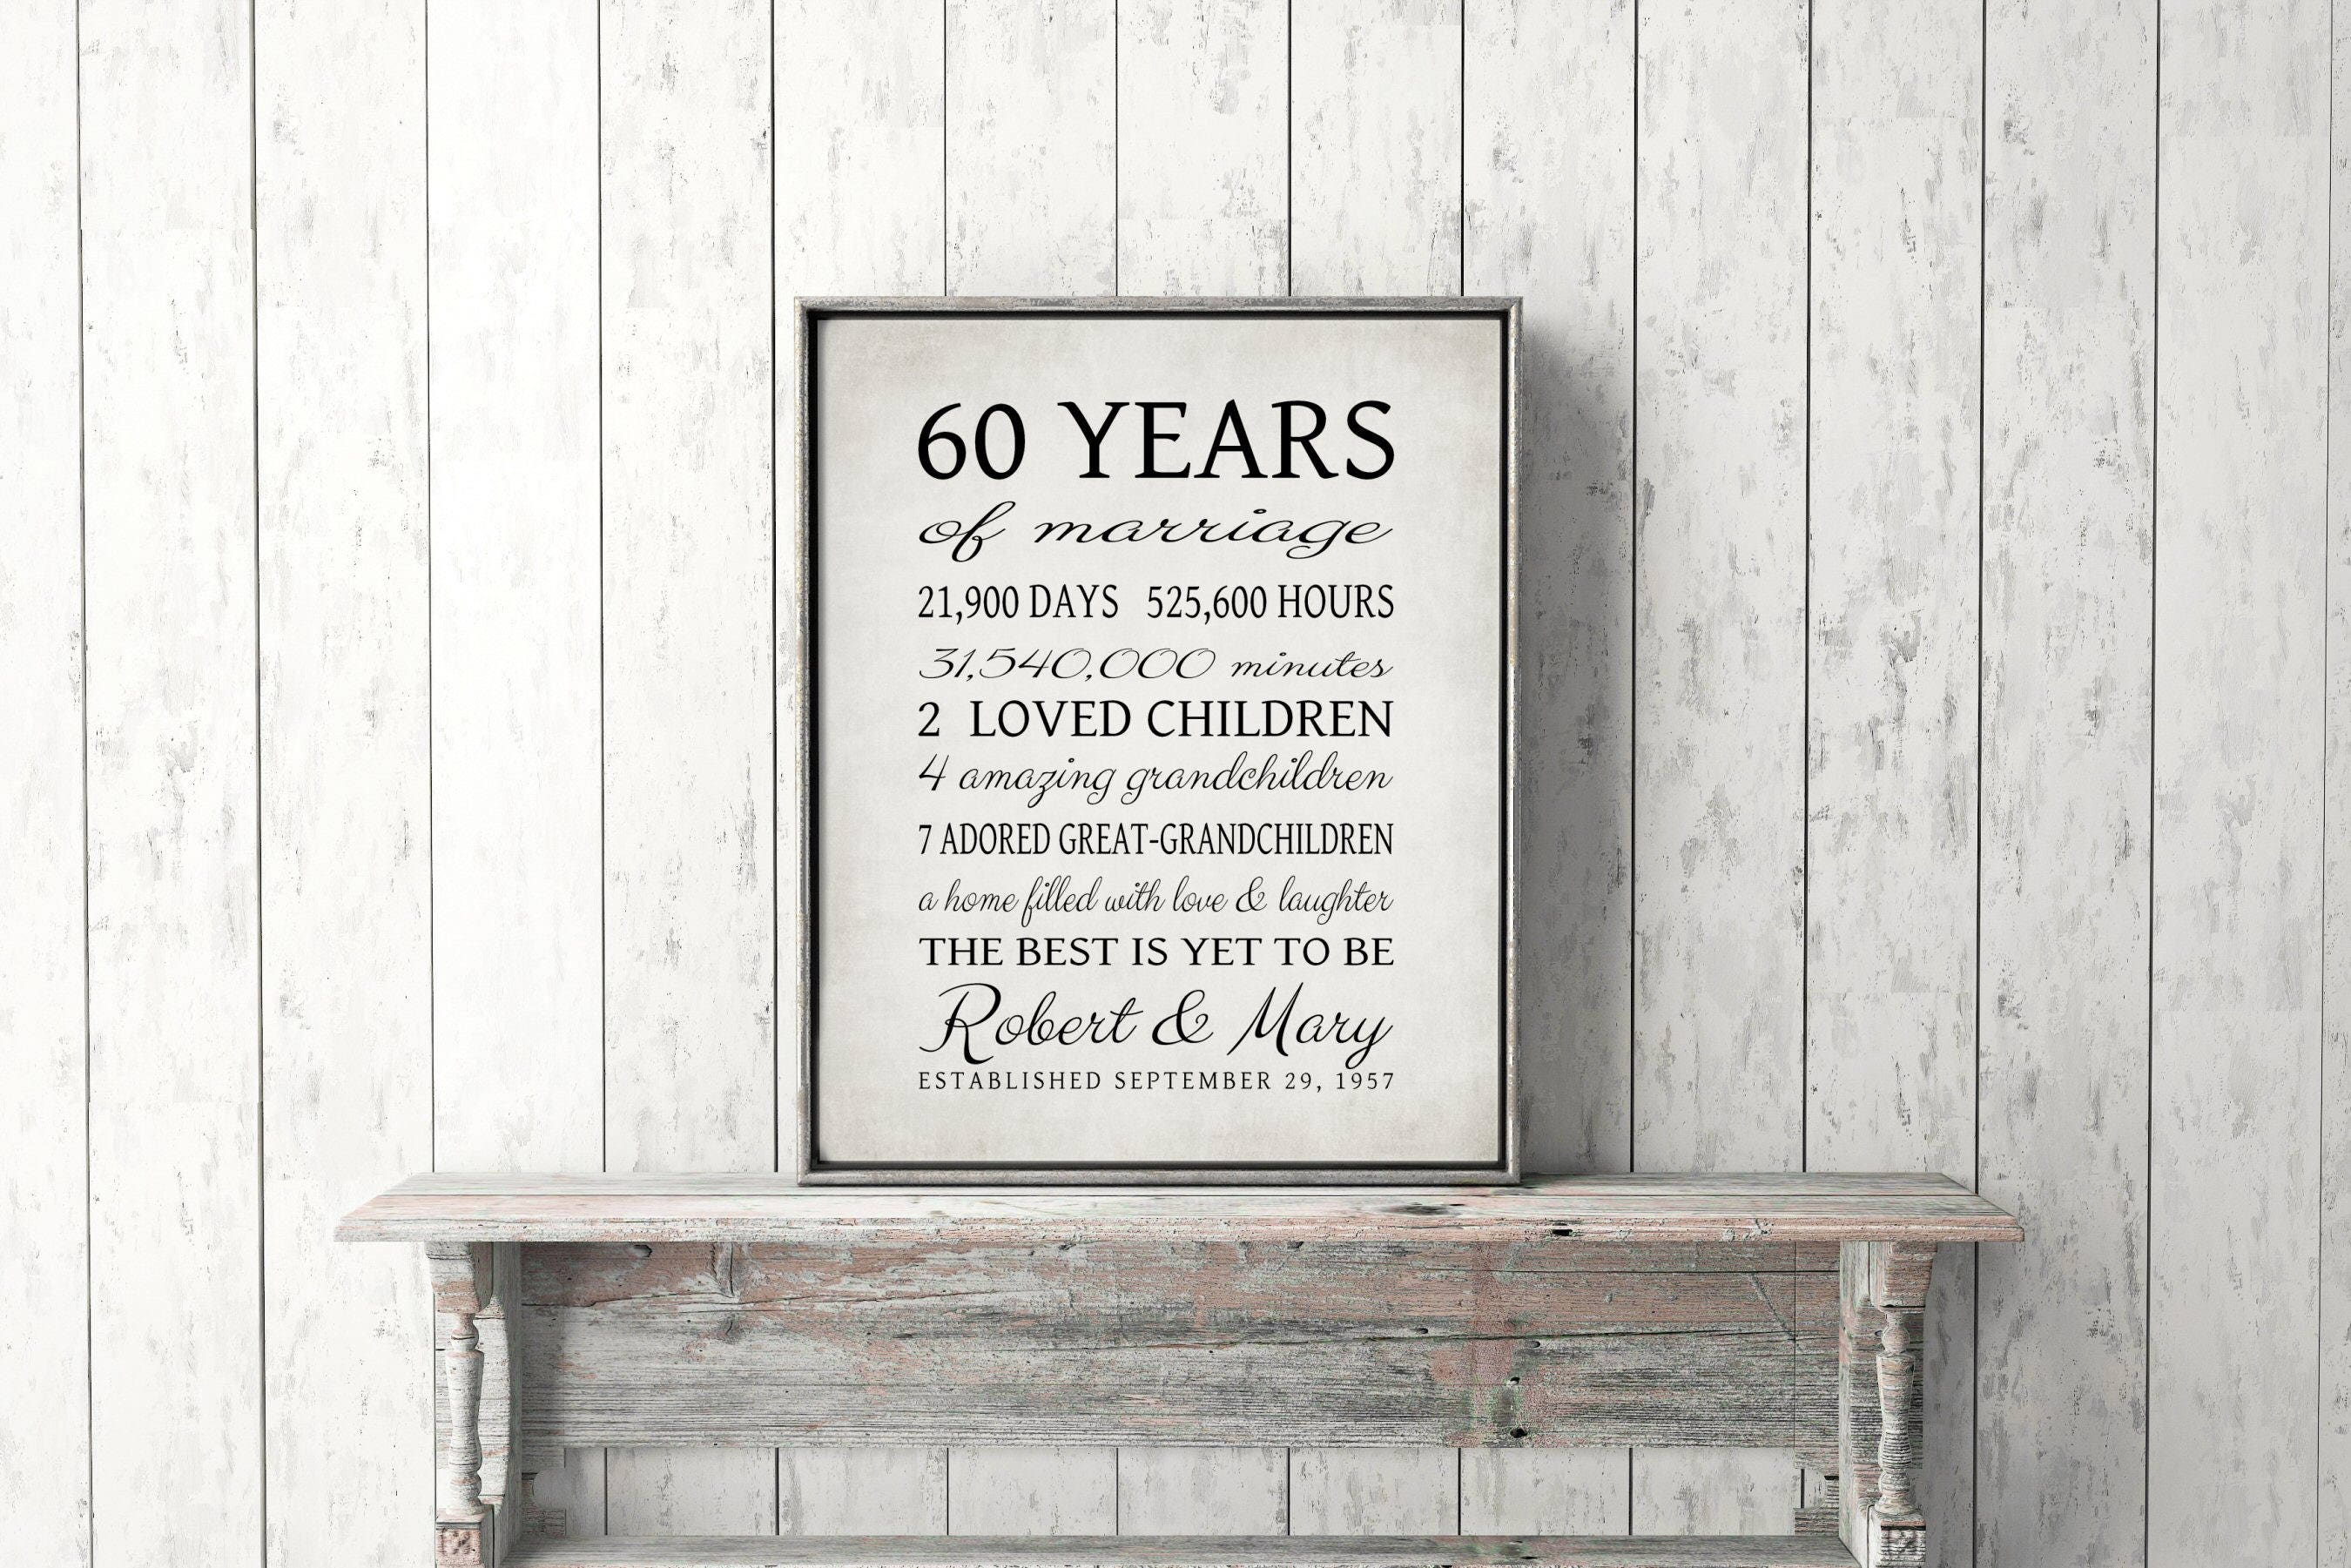 60Th Anniversary Gift - 60th Wedding Anniversary Gift Box | Zazzle : A dinner at a special restaurant, tickets to a show, a trip.